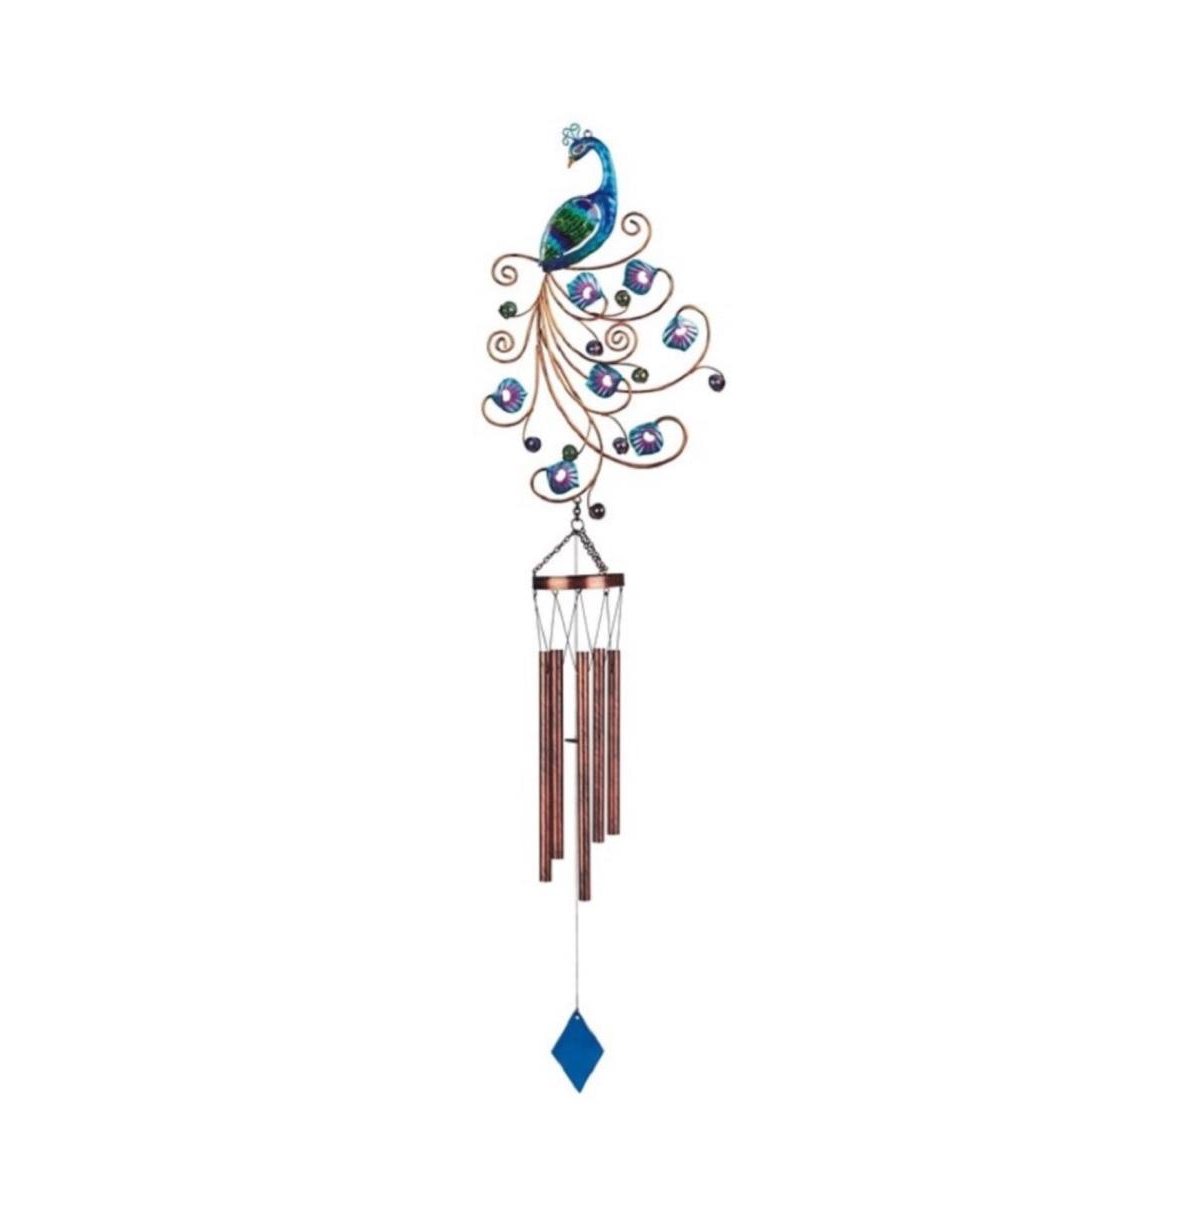 45" Long Blue Purple Peacock Wind Chime Home Decor Perfect Gift for House Warming, Holidays and Birthdays - Multi